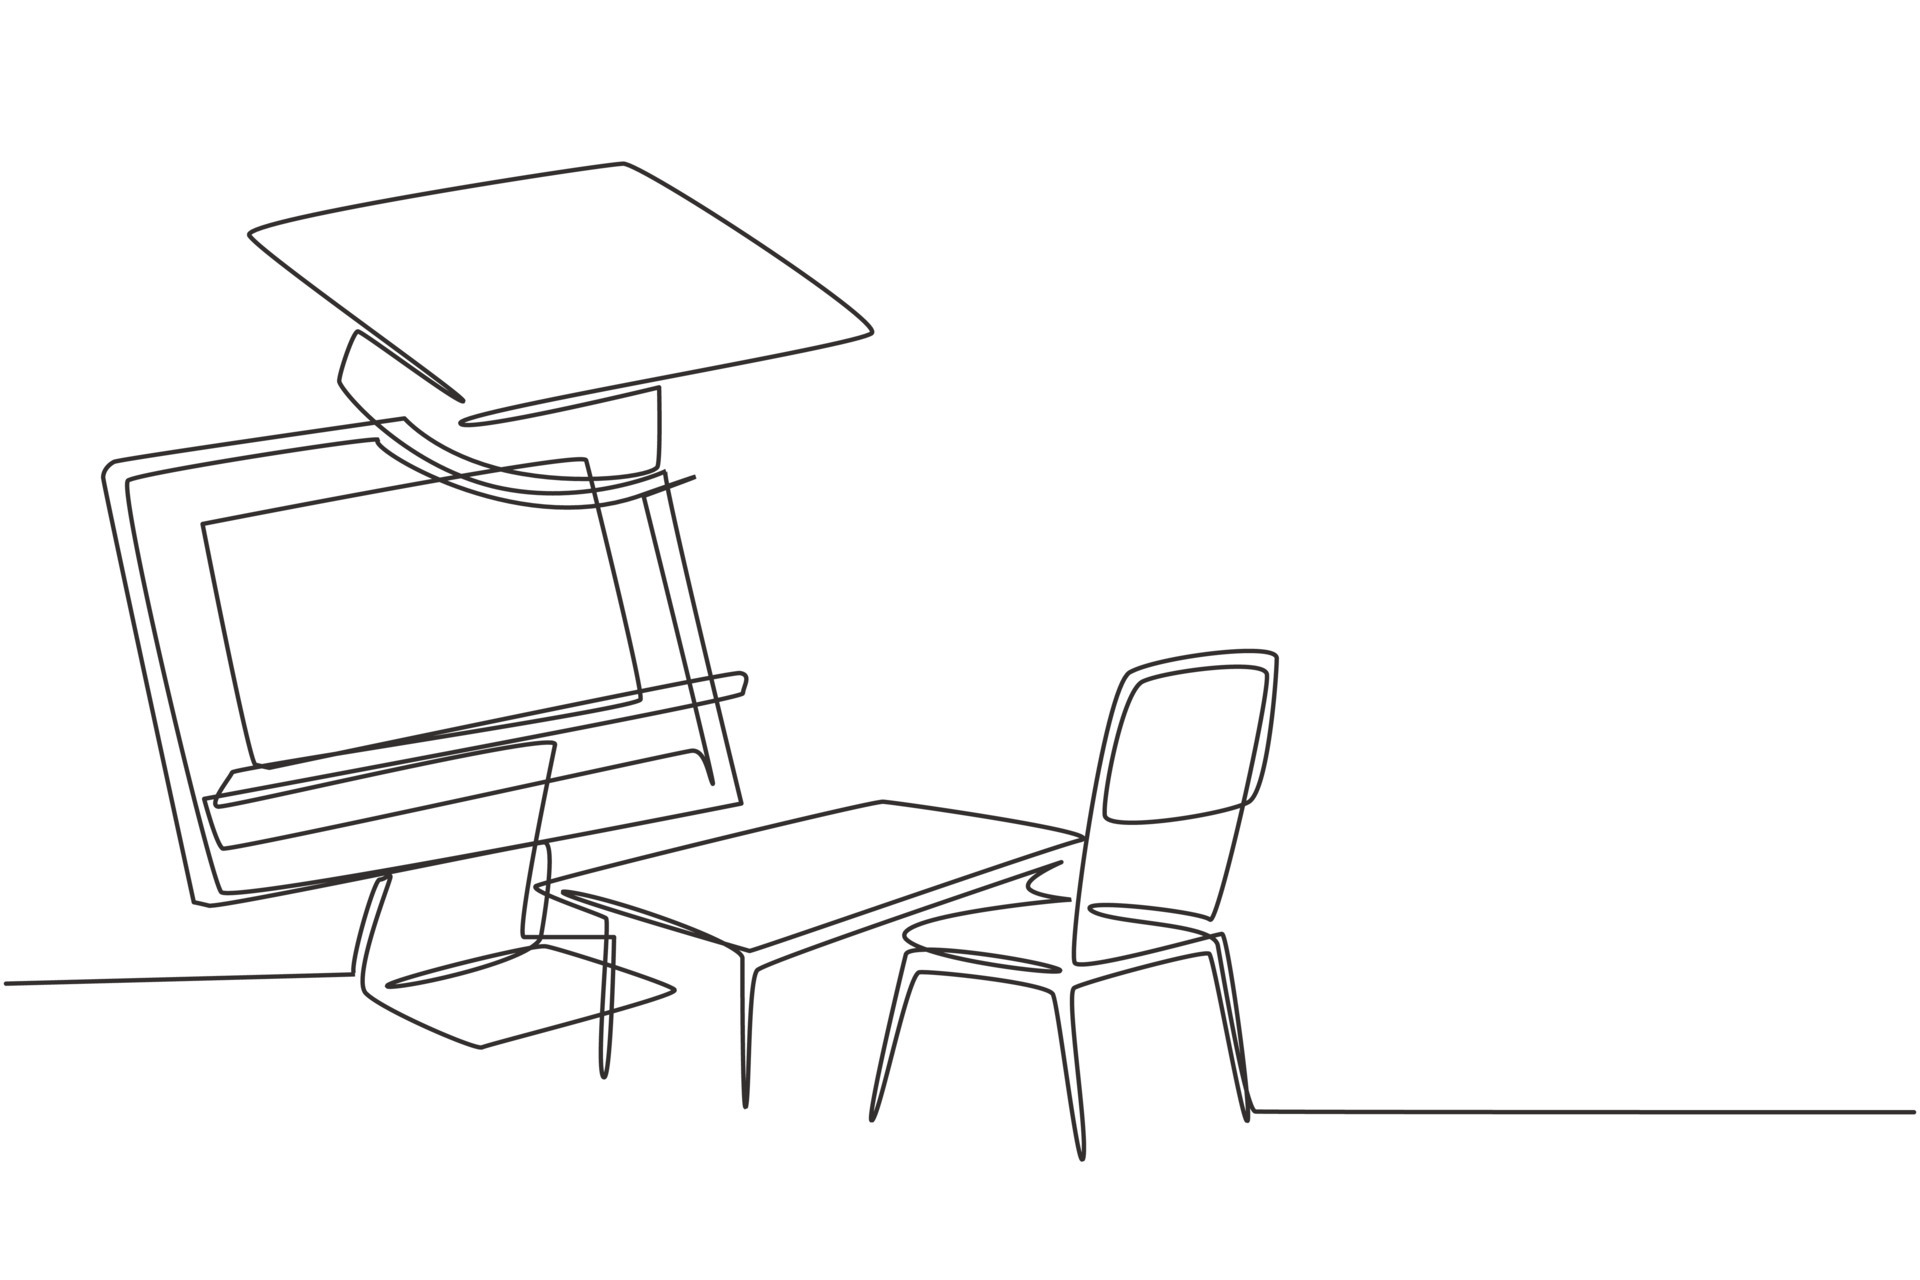 Premium Vector  Sketch the room office chair desk various objects on  the table sketch workspace illustration